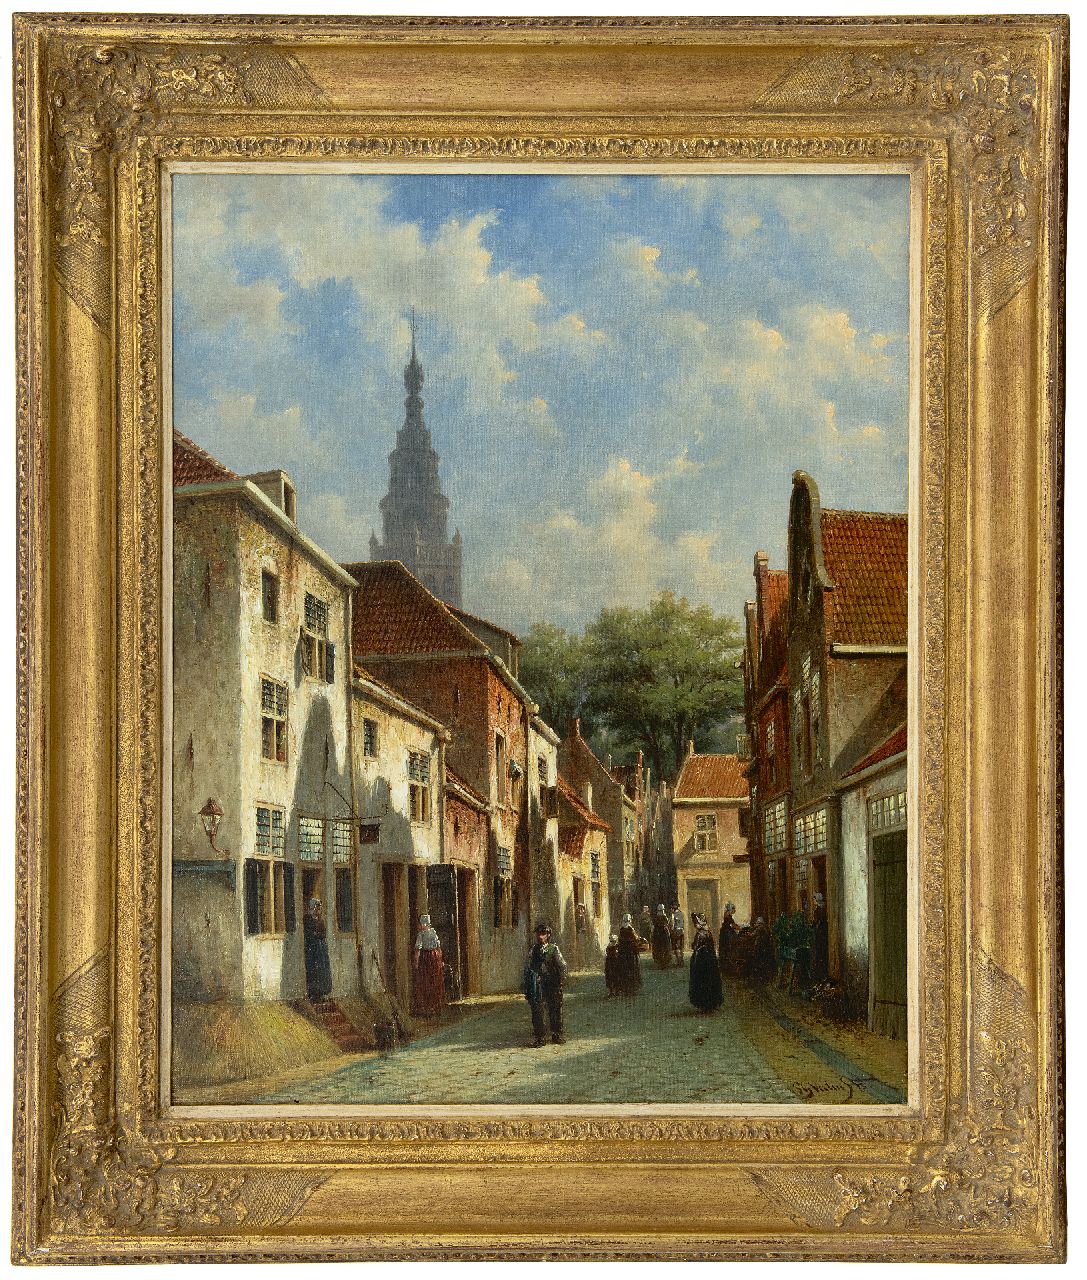 Vertin P.G.  | Petrus Gerardus Vertin |  offered for sale | City scape, 63.0 x 50.5 cm, signed l.r. and dated '73